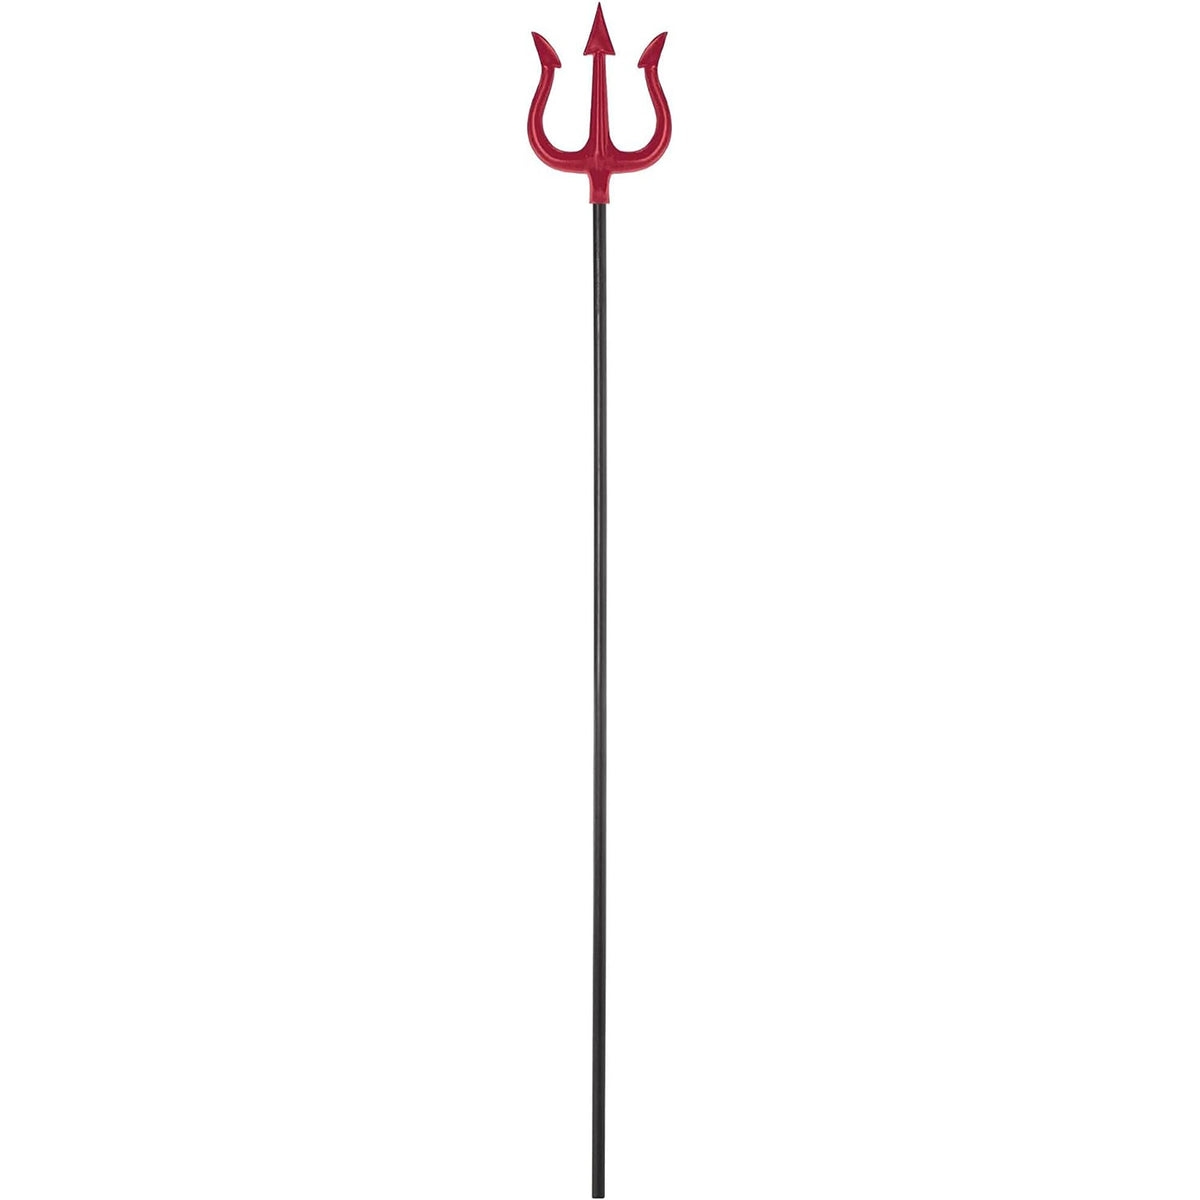 HALLOWEEN COSTUME CO. Costume Accessories Giant Devil Pitchfork, 1 Count